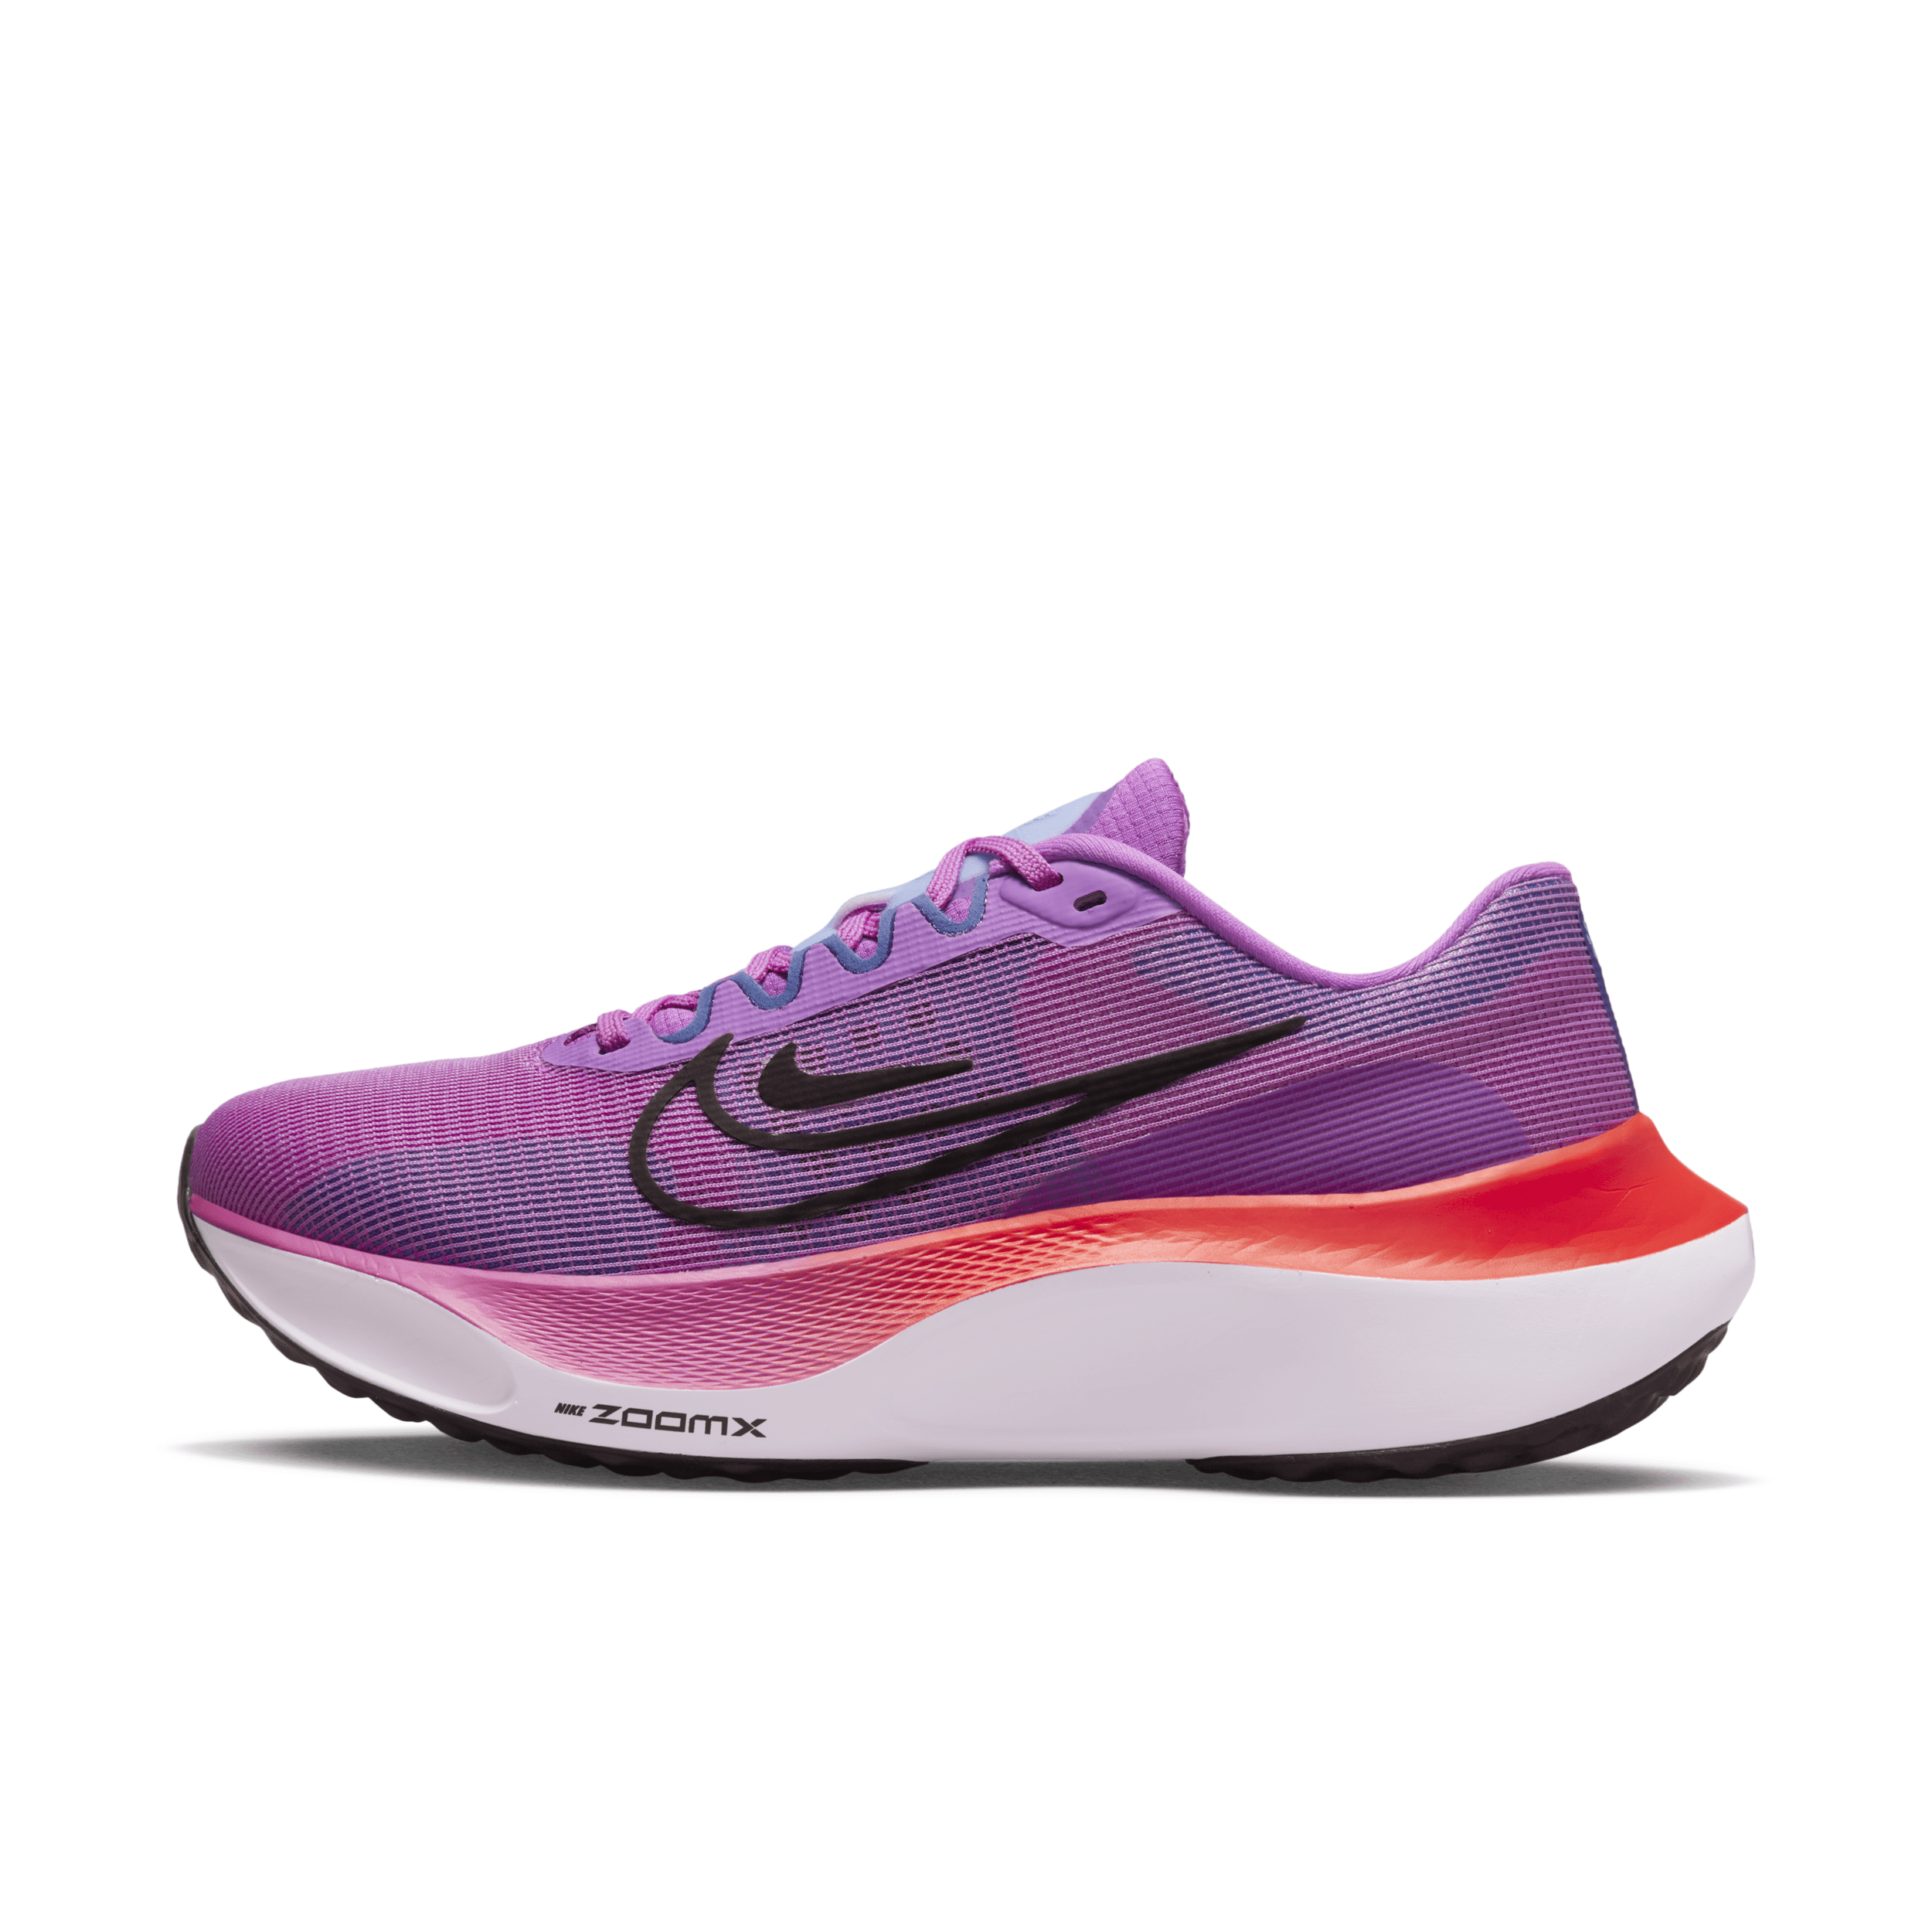 NIKE WOMEN'S ZOOM FLY 5 ROAD RUNNING SHOES,1003842023